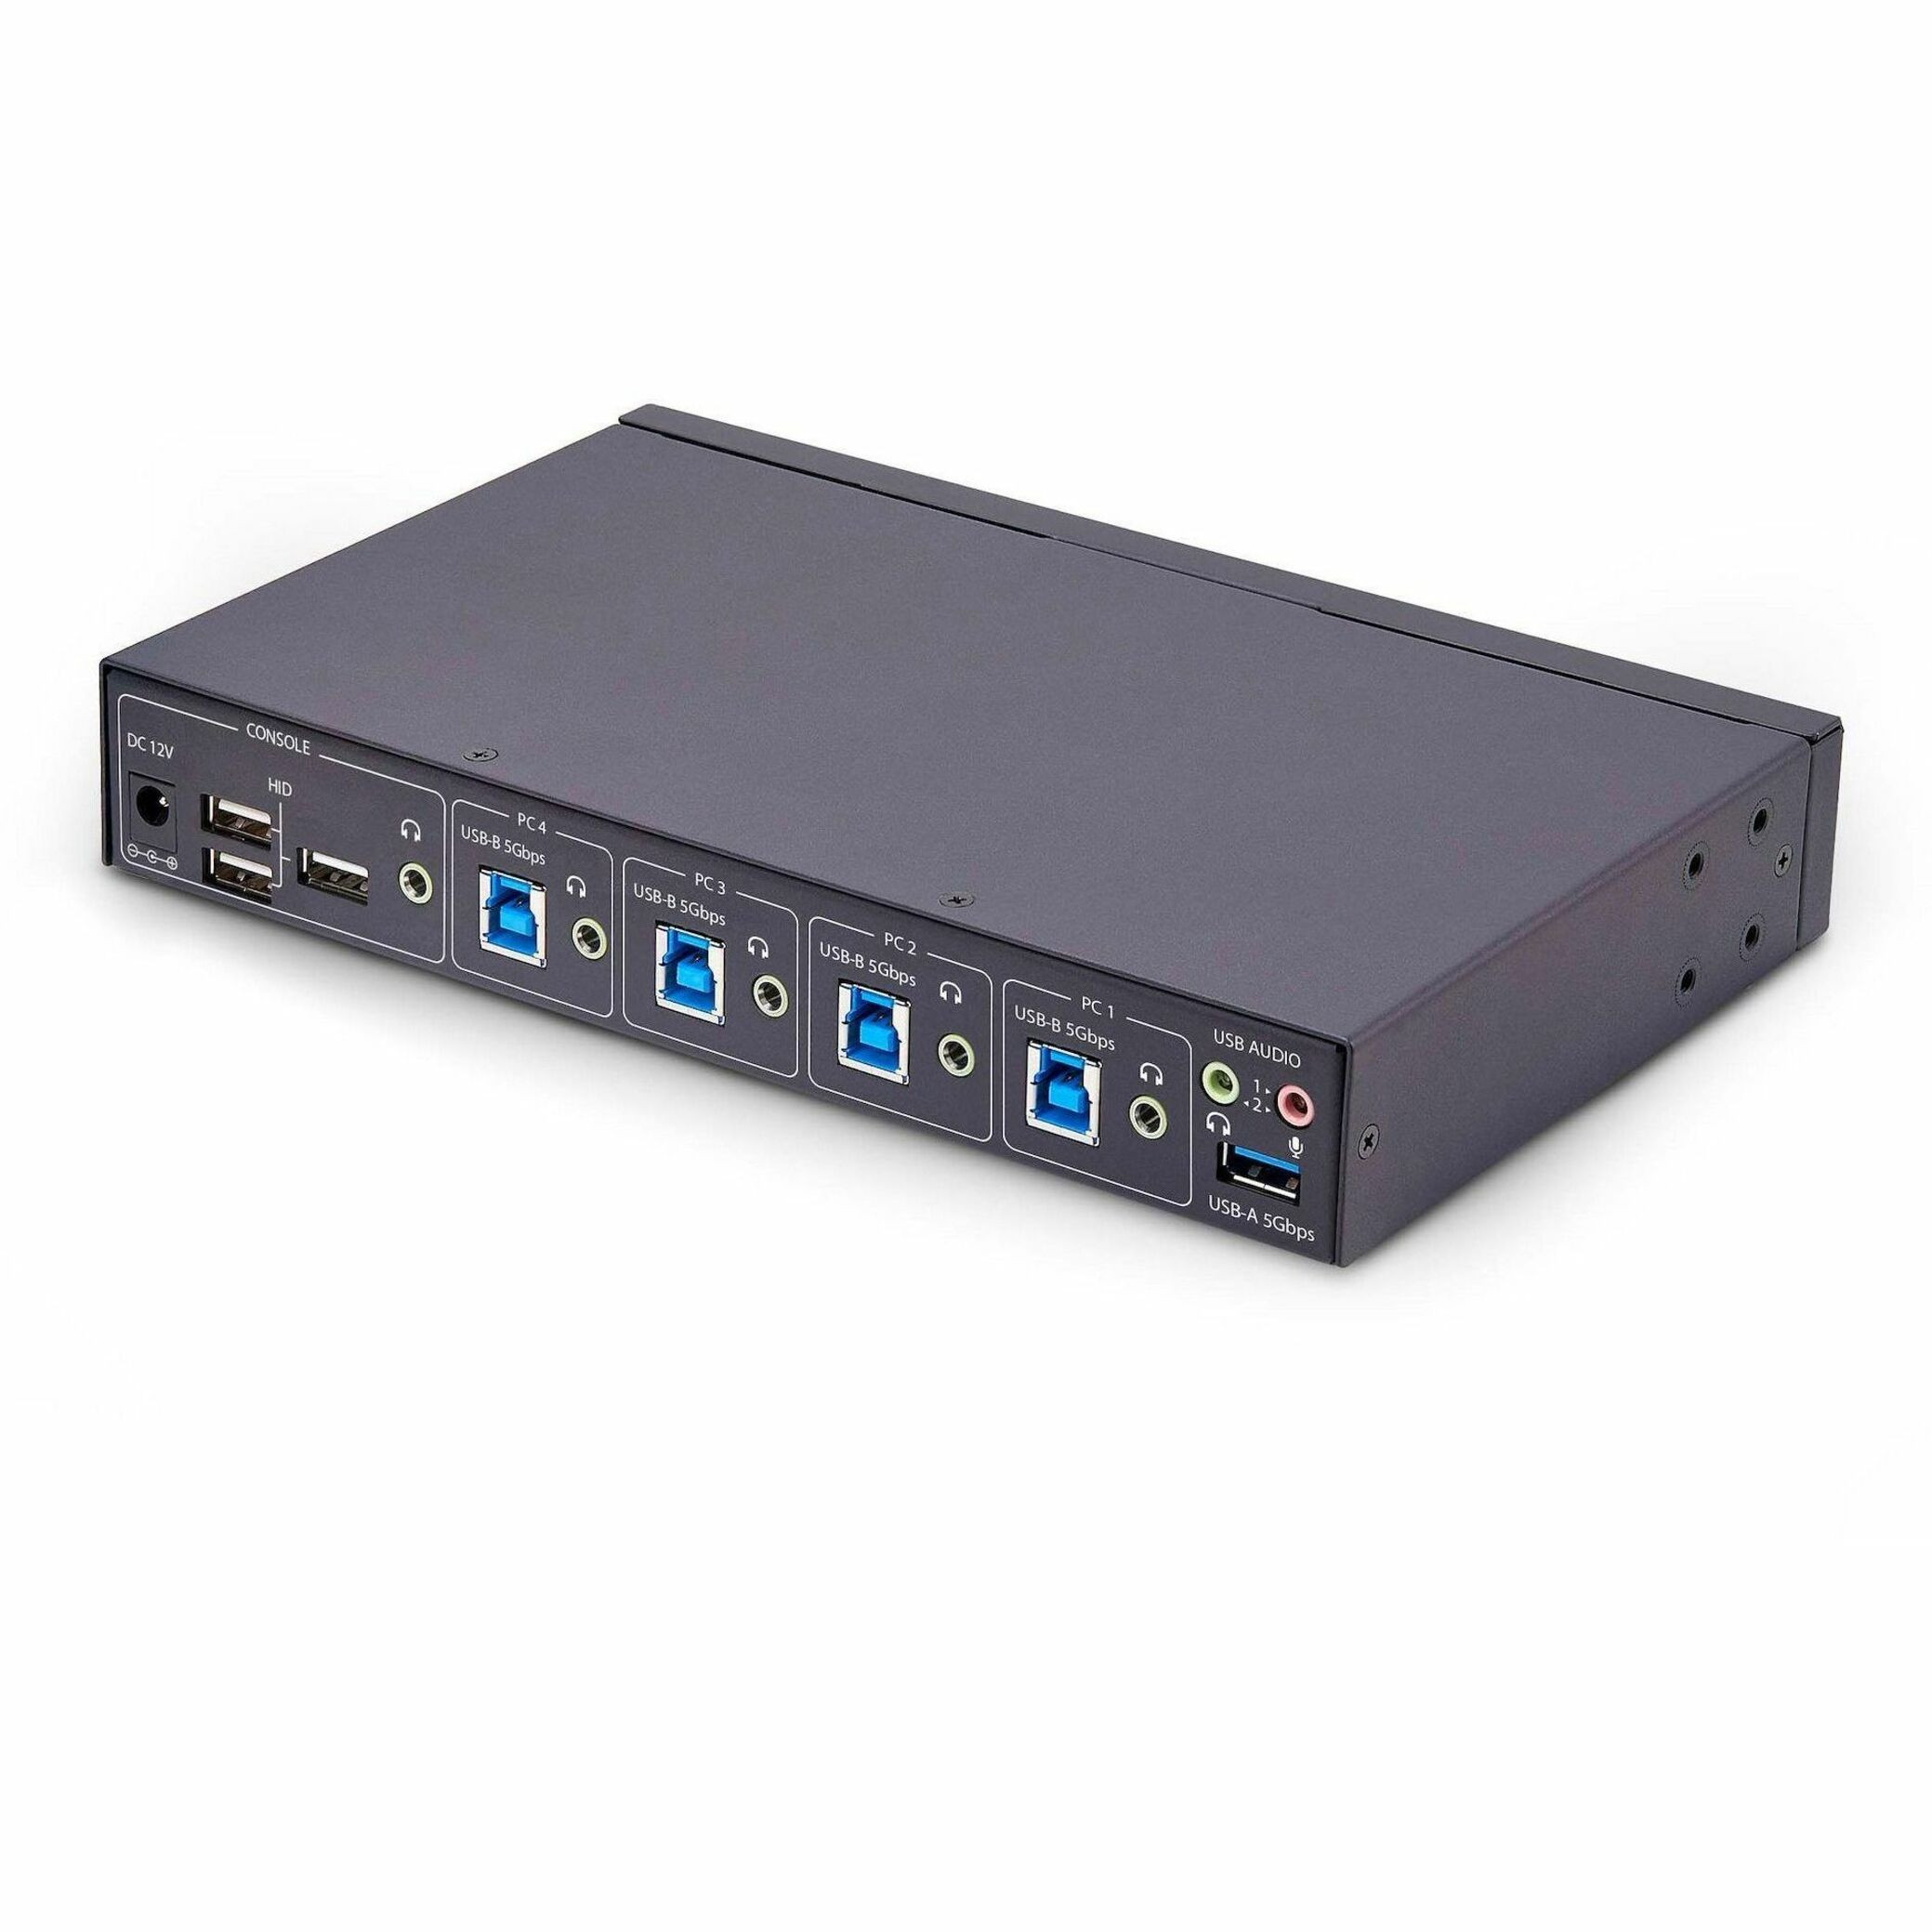 Startech .com 4-Port KM Switch with Mouse Roaming, USB 3.0 Keyboard/Mouse Switcher for 4 Computers, 3.5mm and USB Audio, TAA Compliant… P4A20132-KM-SWITCH